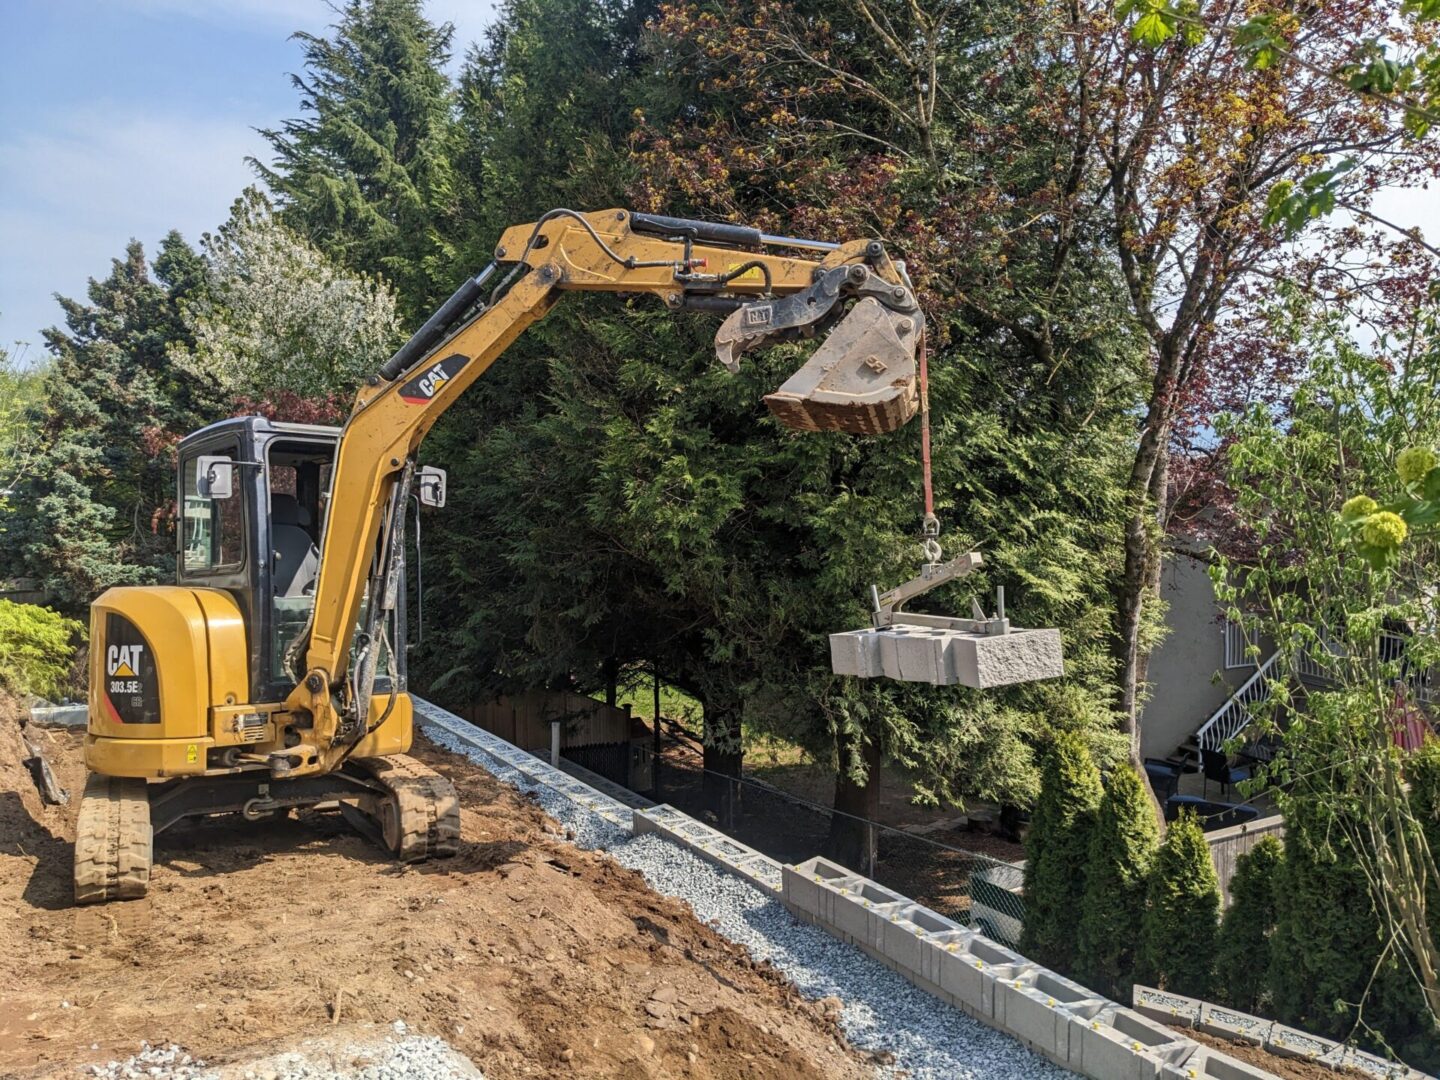 A yellow excavator moving landscaping bricks on a sloped yard with green trees and a house in the background.